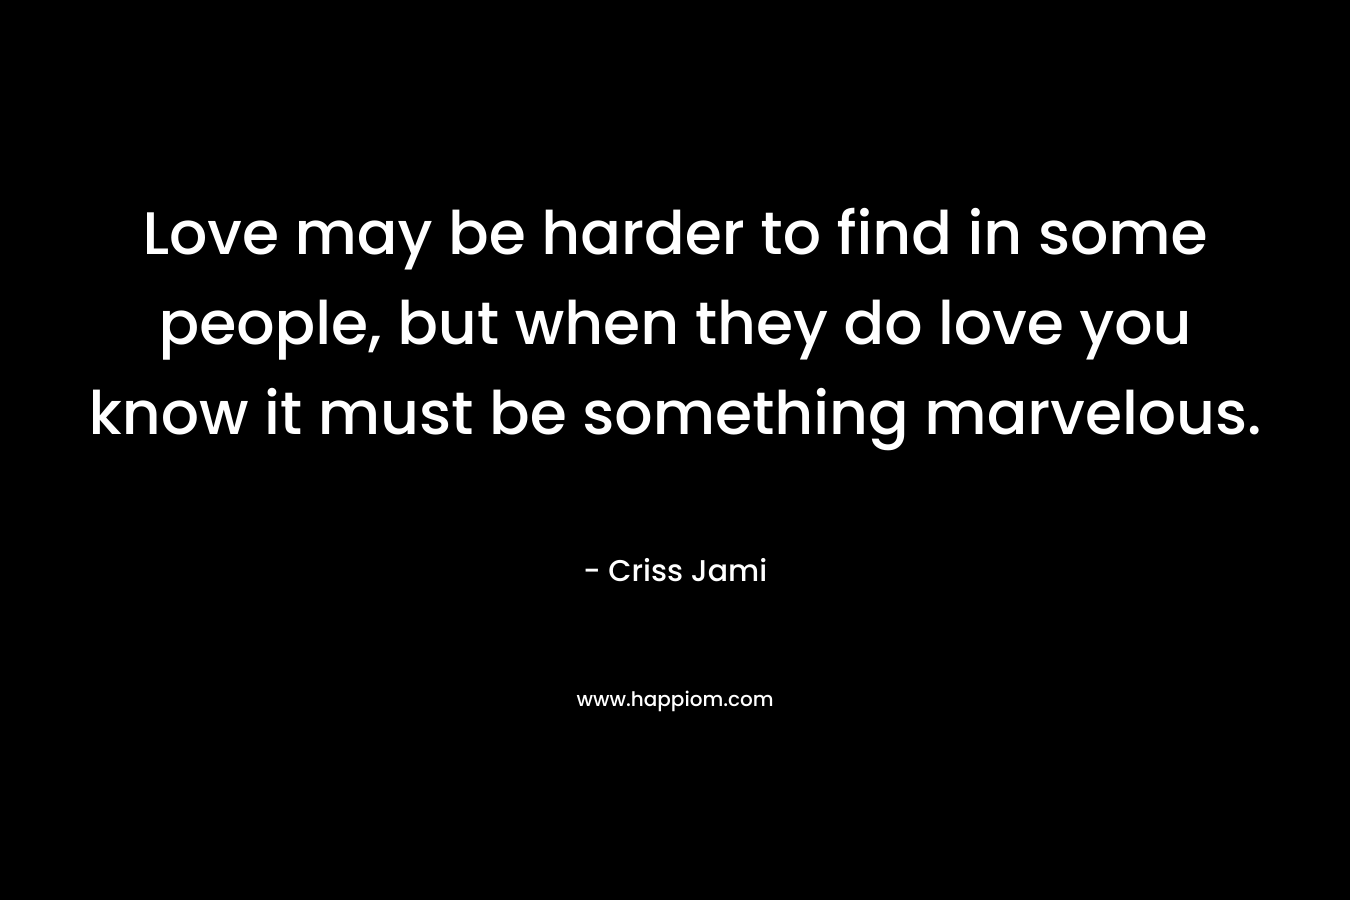 Love may be harder to find in some people, but when they do love you know it must be something marvelous.